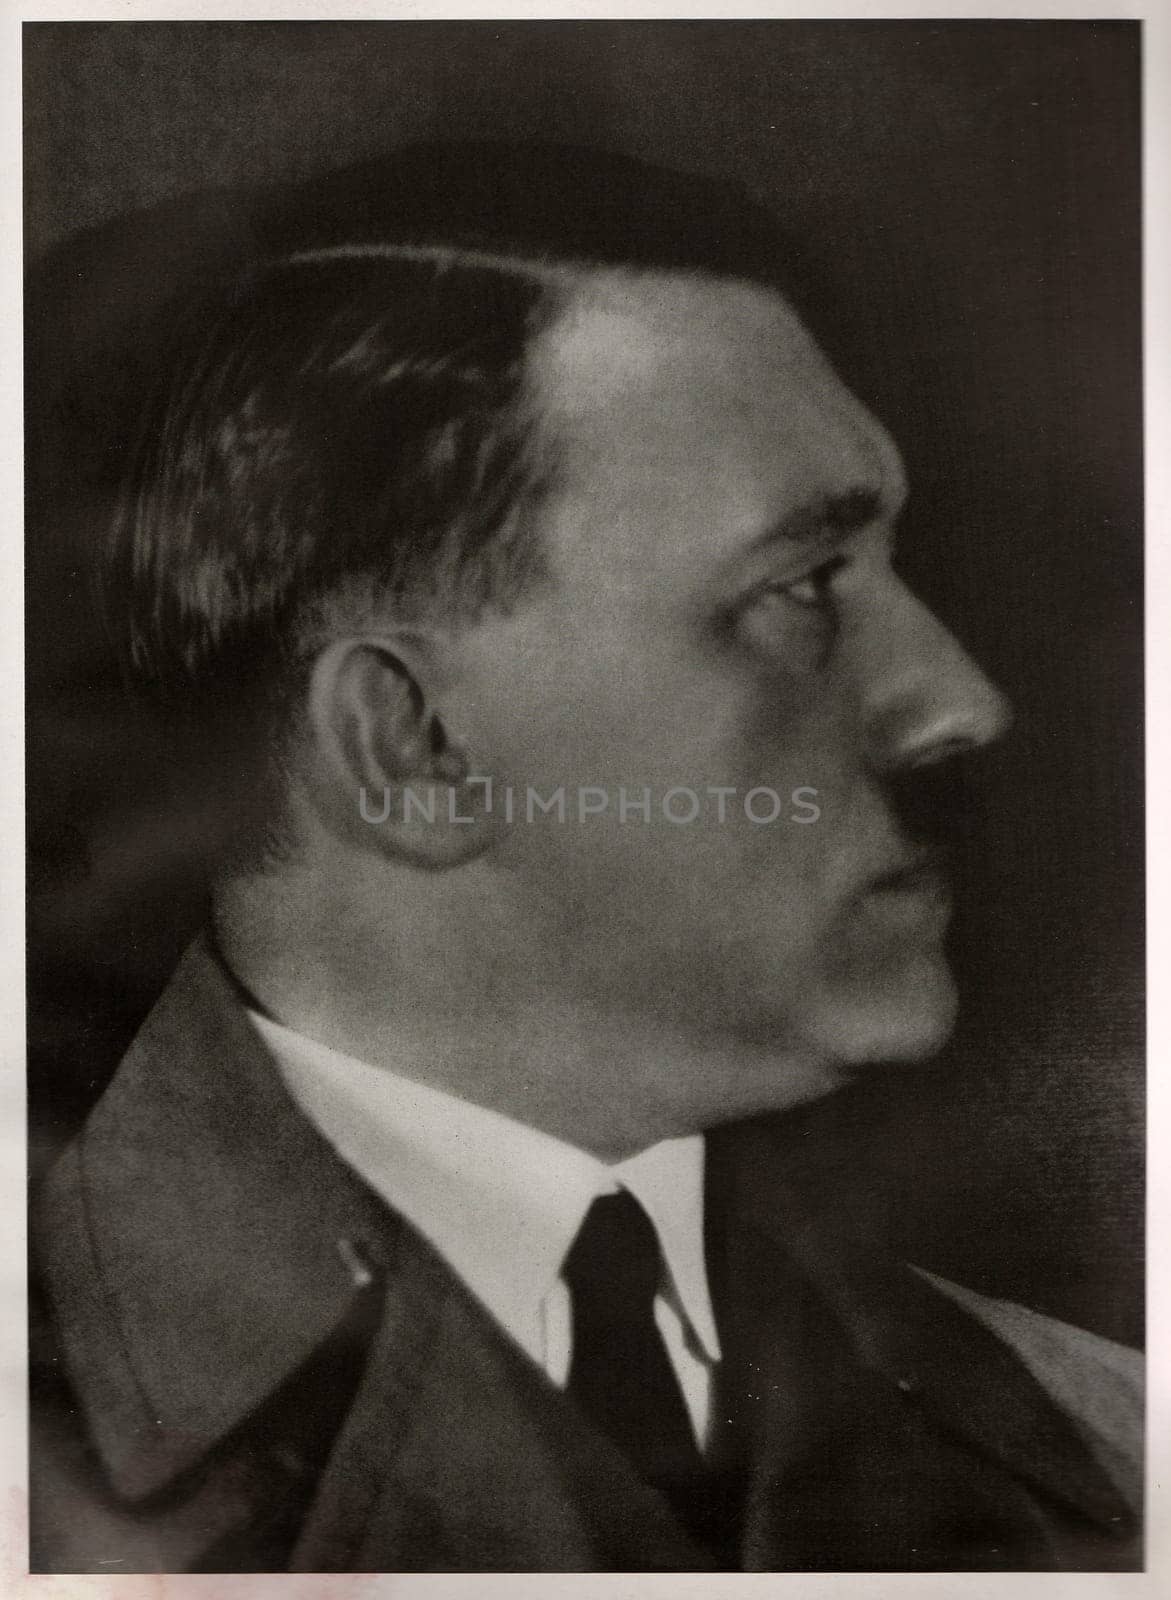 GERMANY - 1928: Studio portrait of Adolf Hitler, leader of nazi Germany. Reproduction of antique photo.